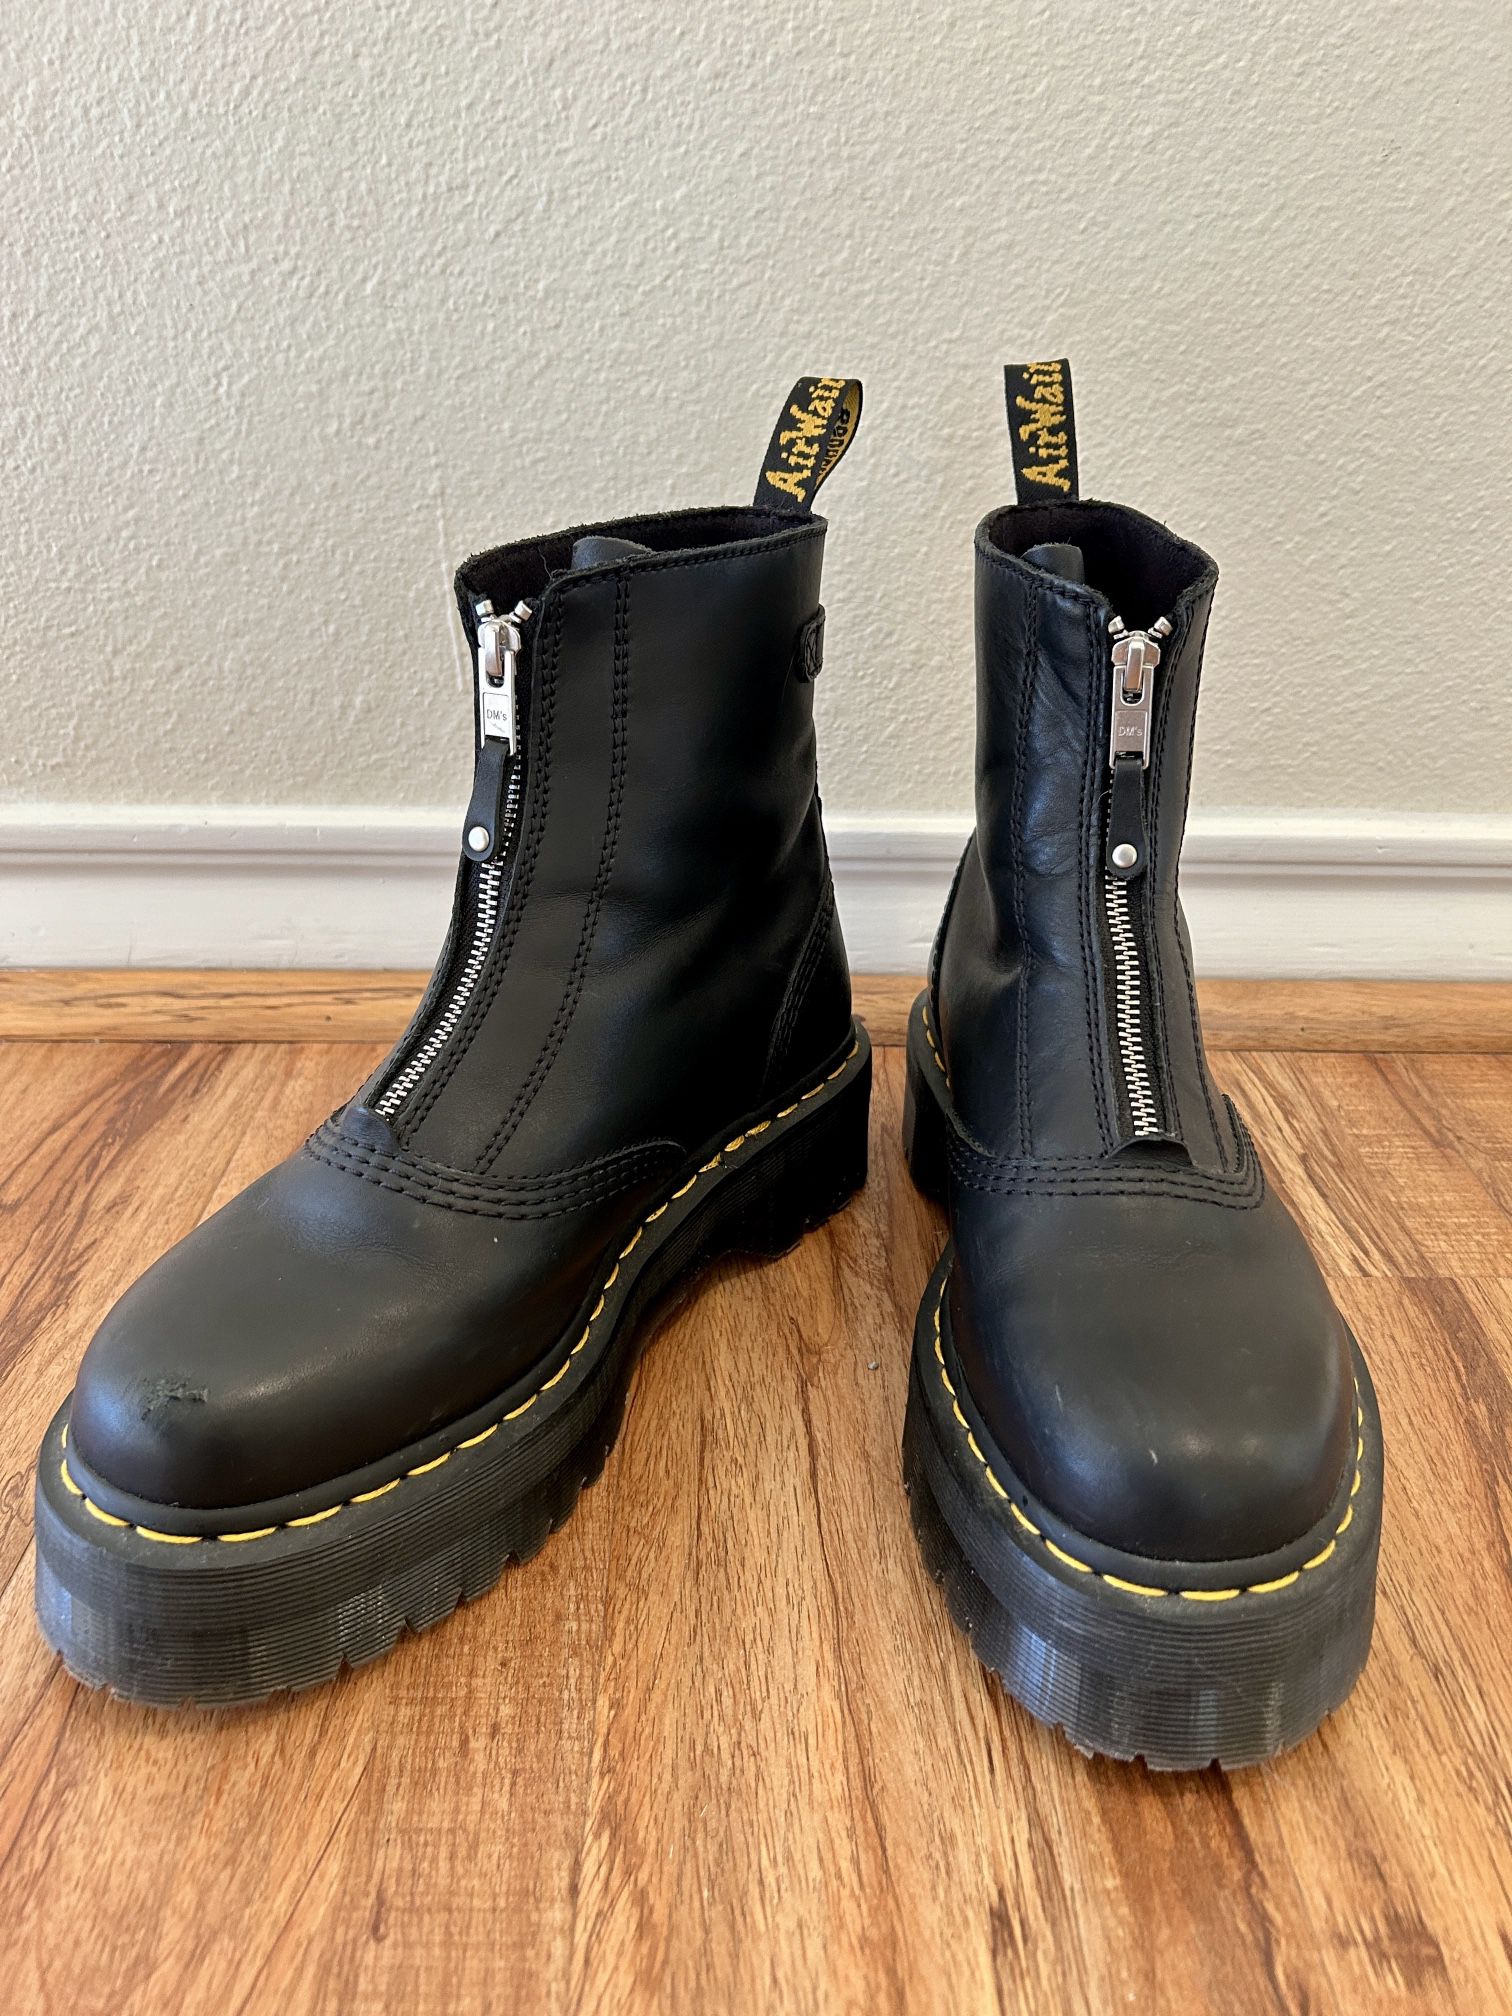 Dr. Martens Jetta Sendal Leather Boots 